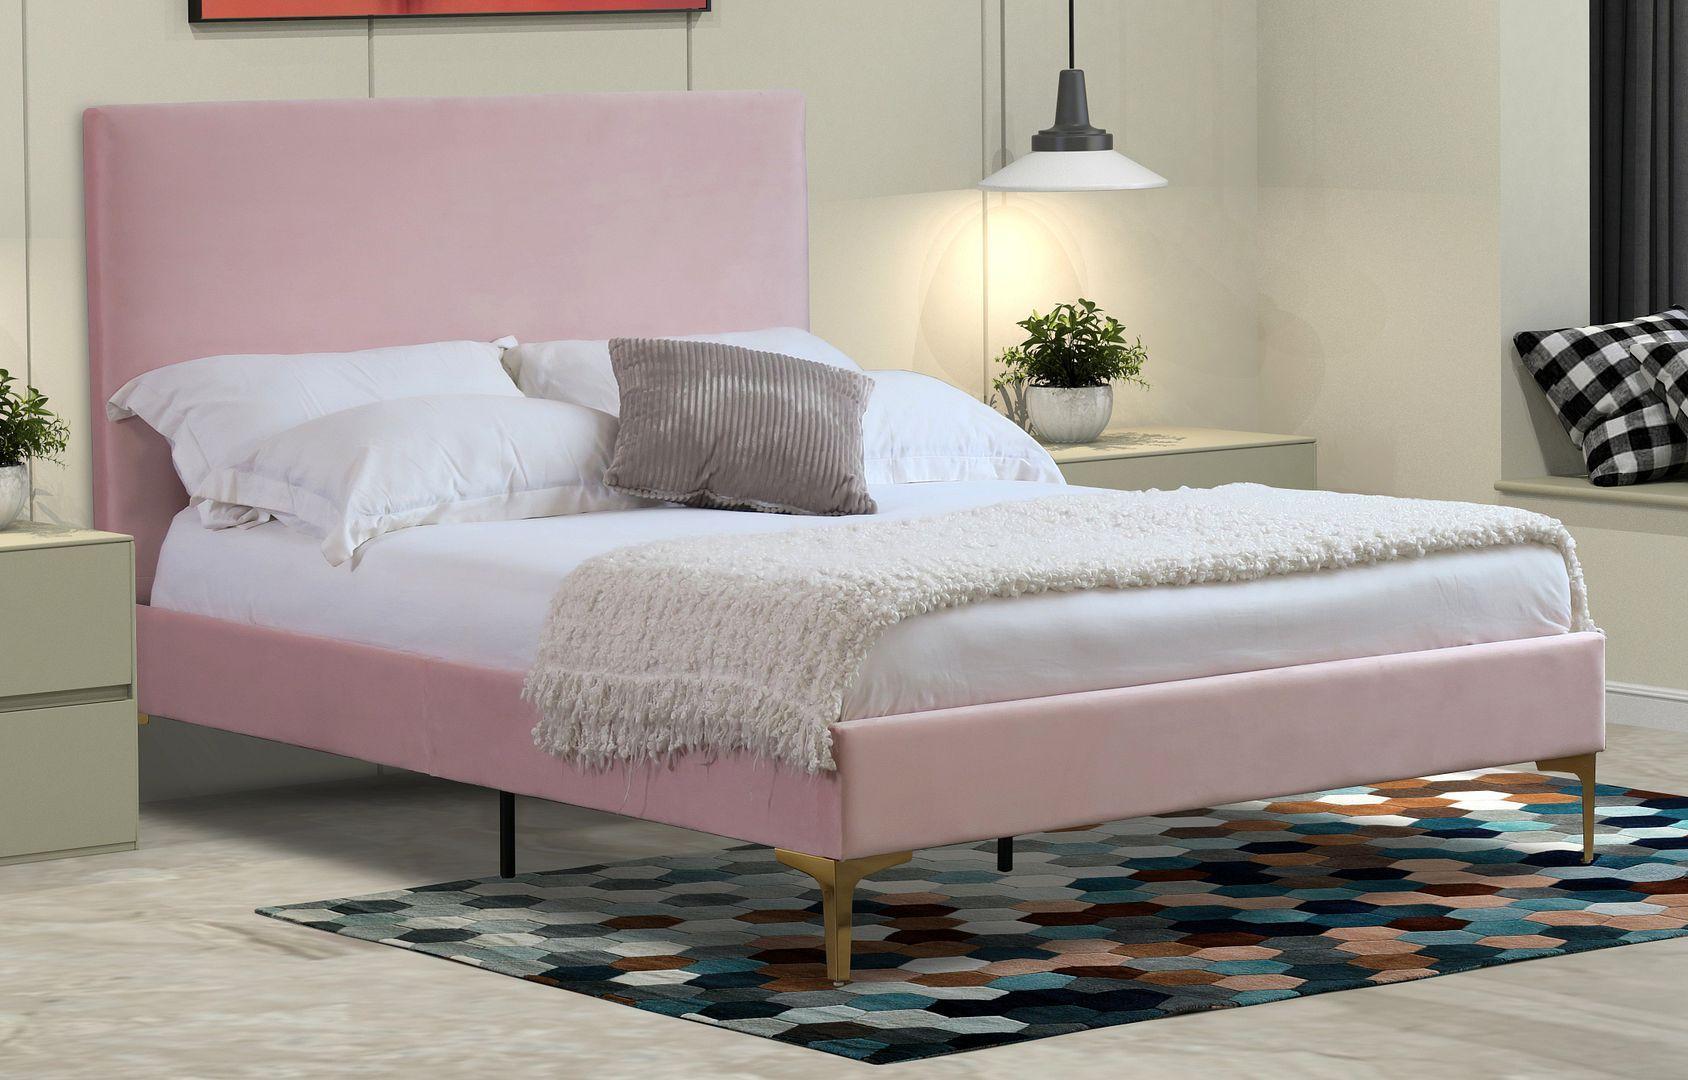 Istyle Modern Classic Cristian Double Velvet Bed Frame Pink with Gold Legs